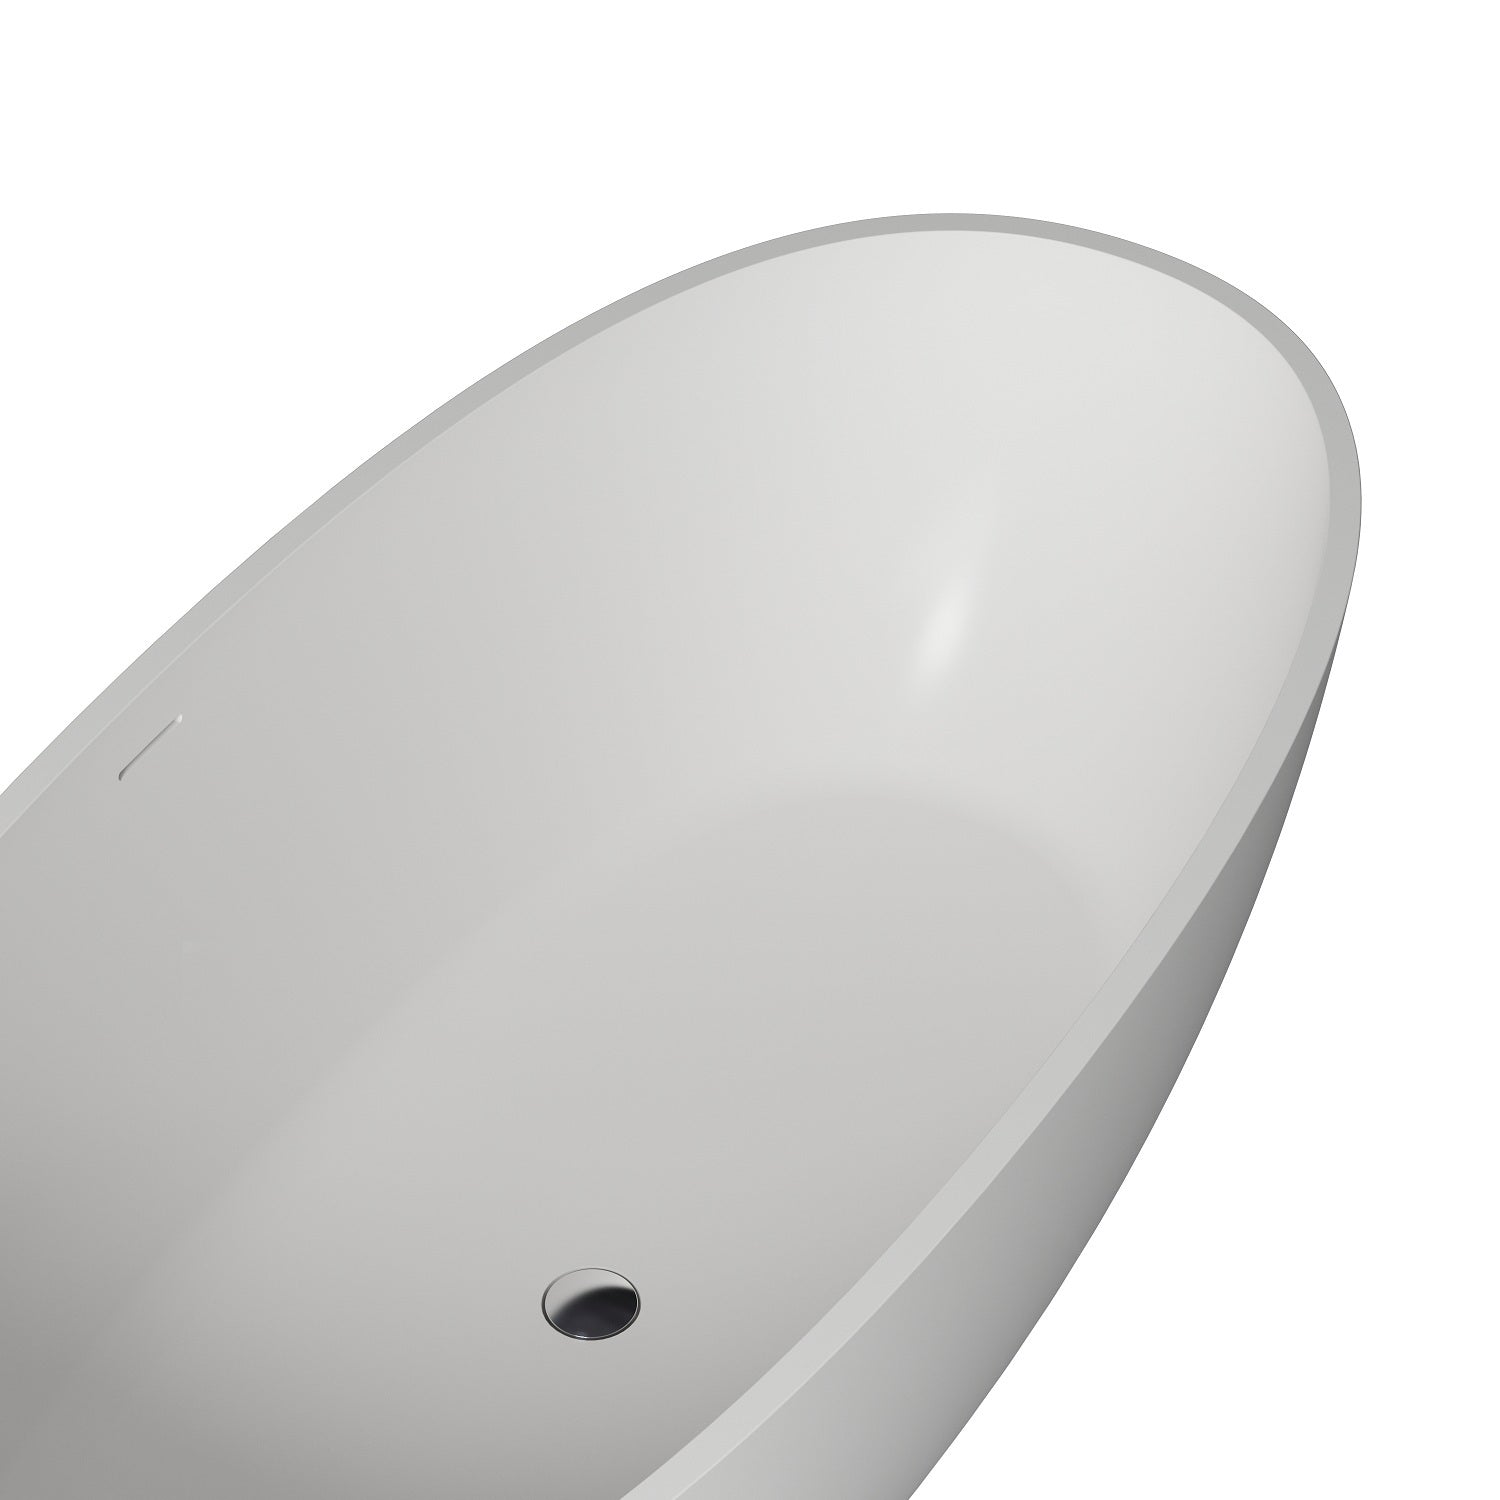 Solid Surface Freestanding Bathtub - White Solid